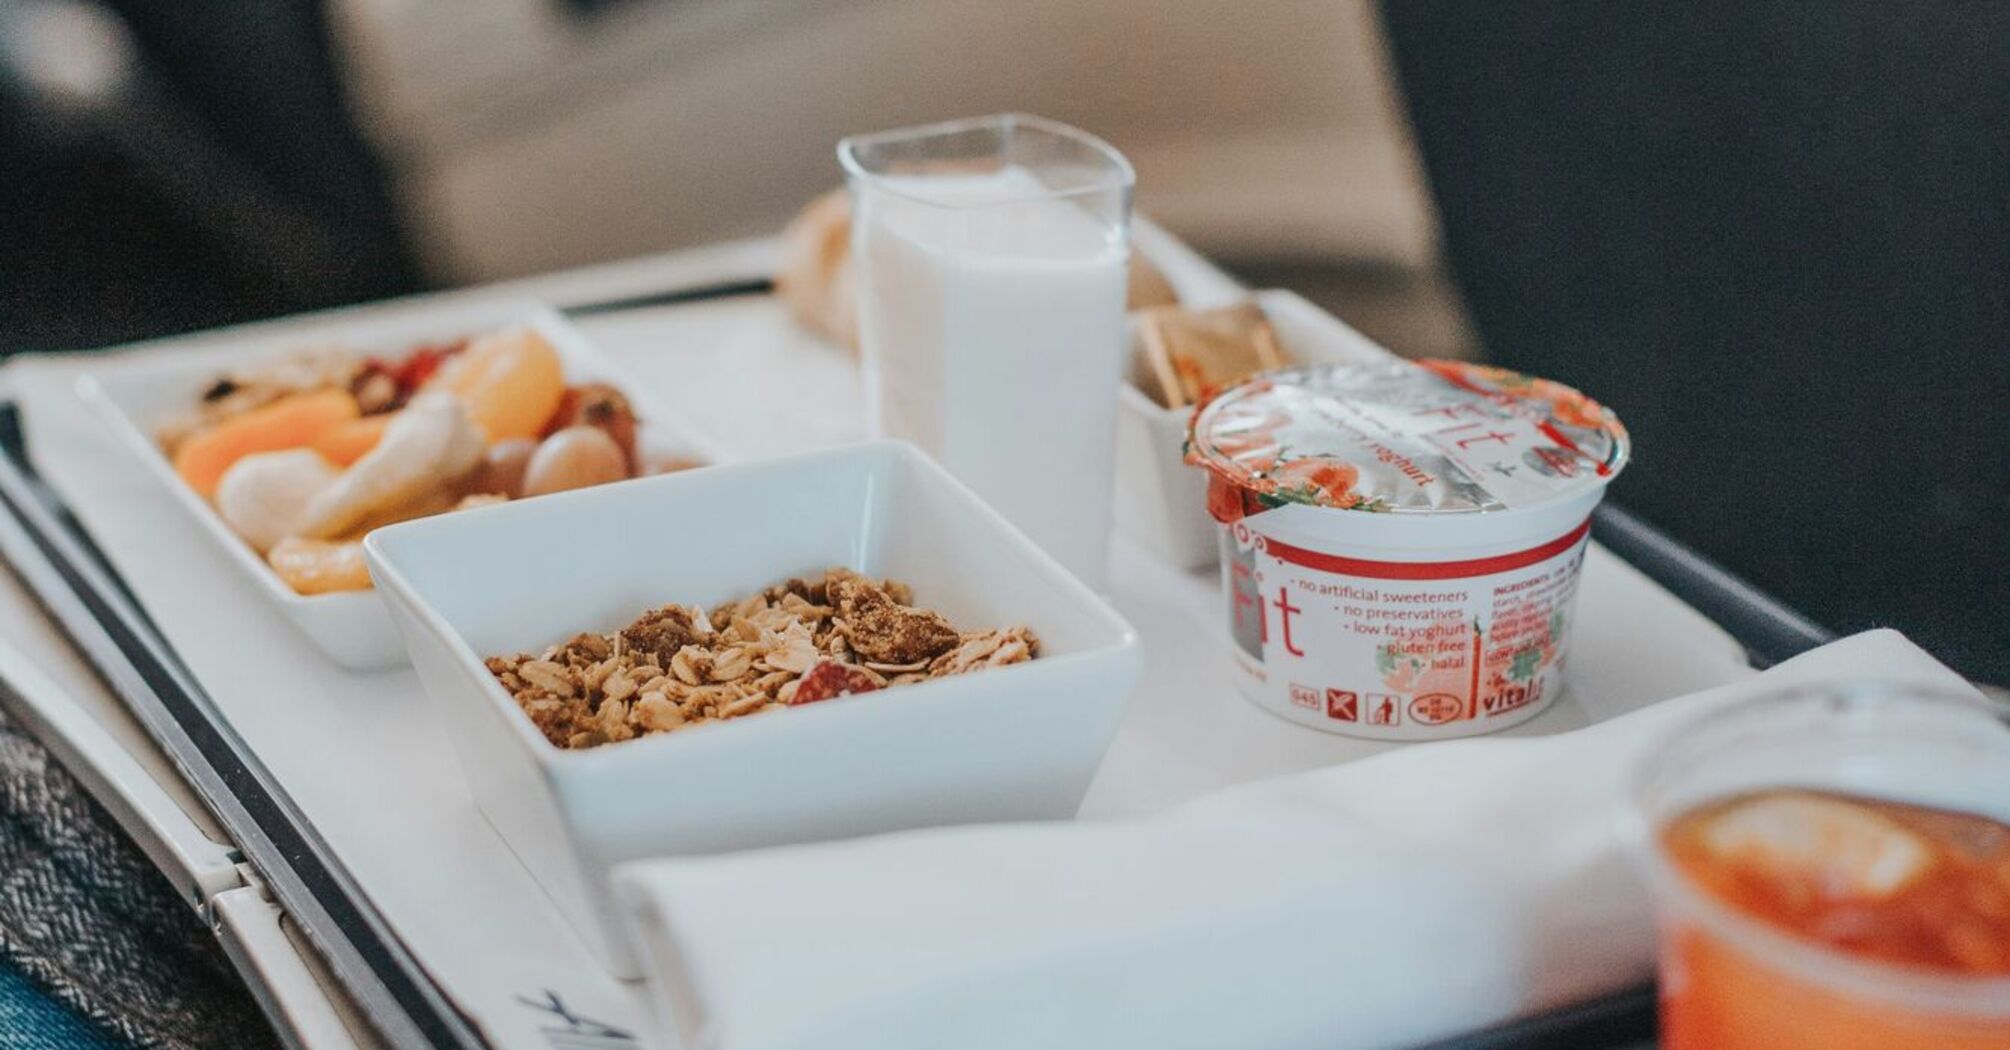 Inflight tray table with a breakfast meal and beverage